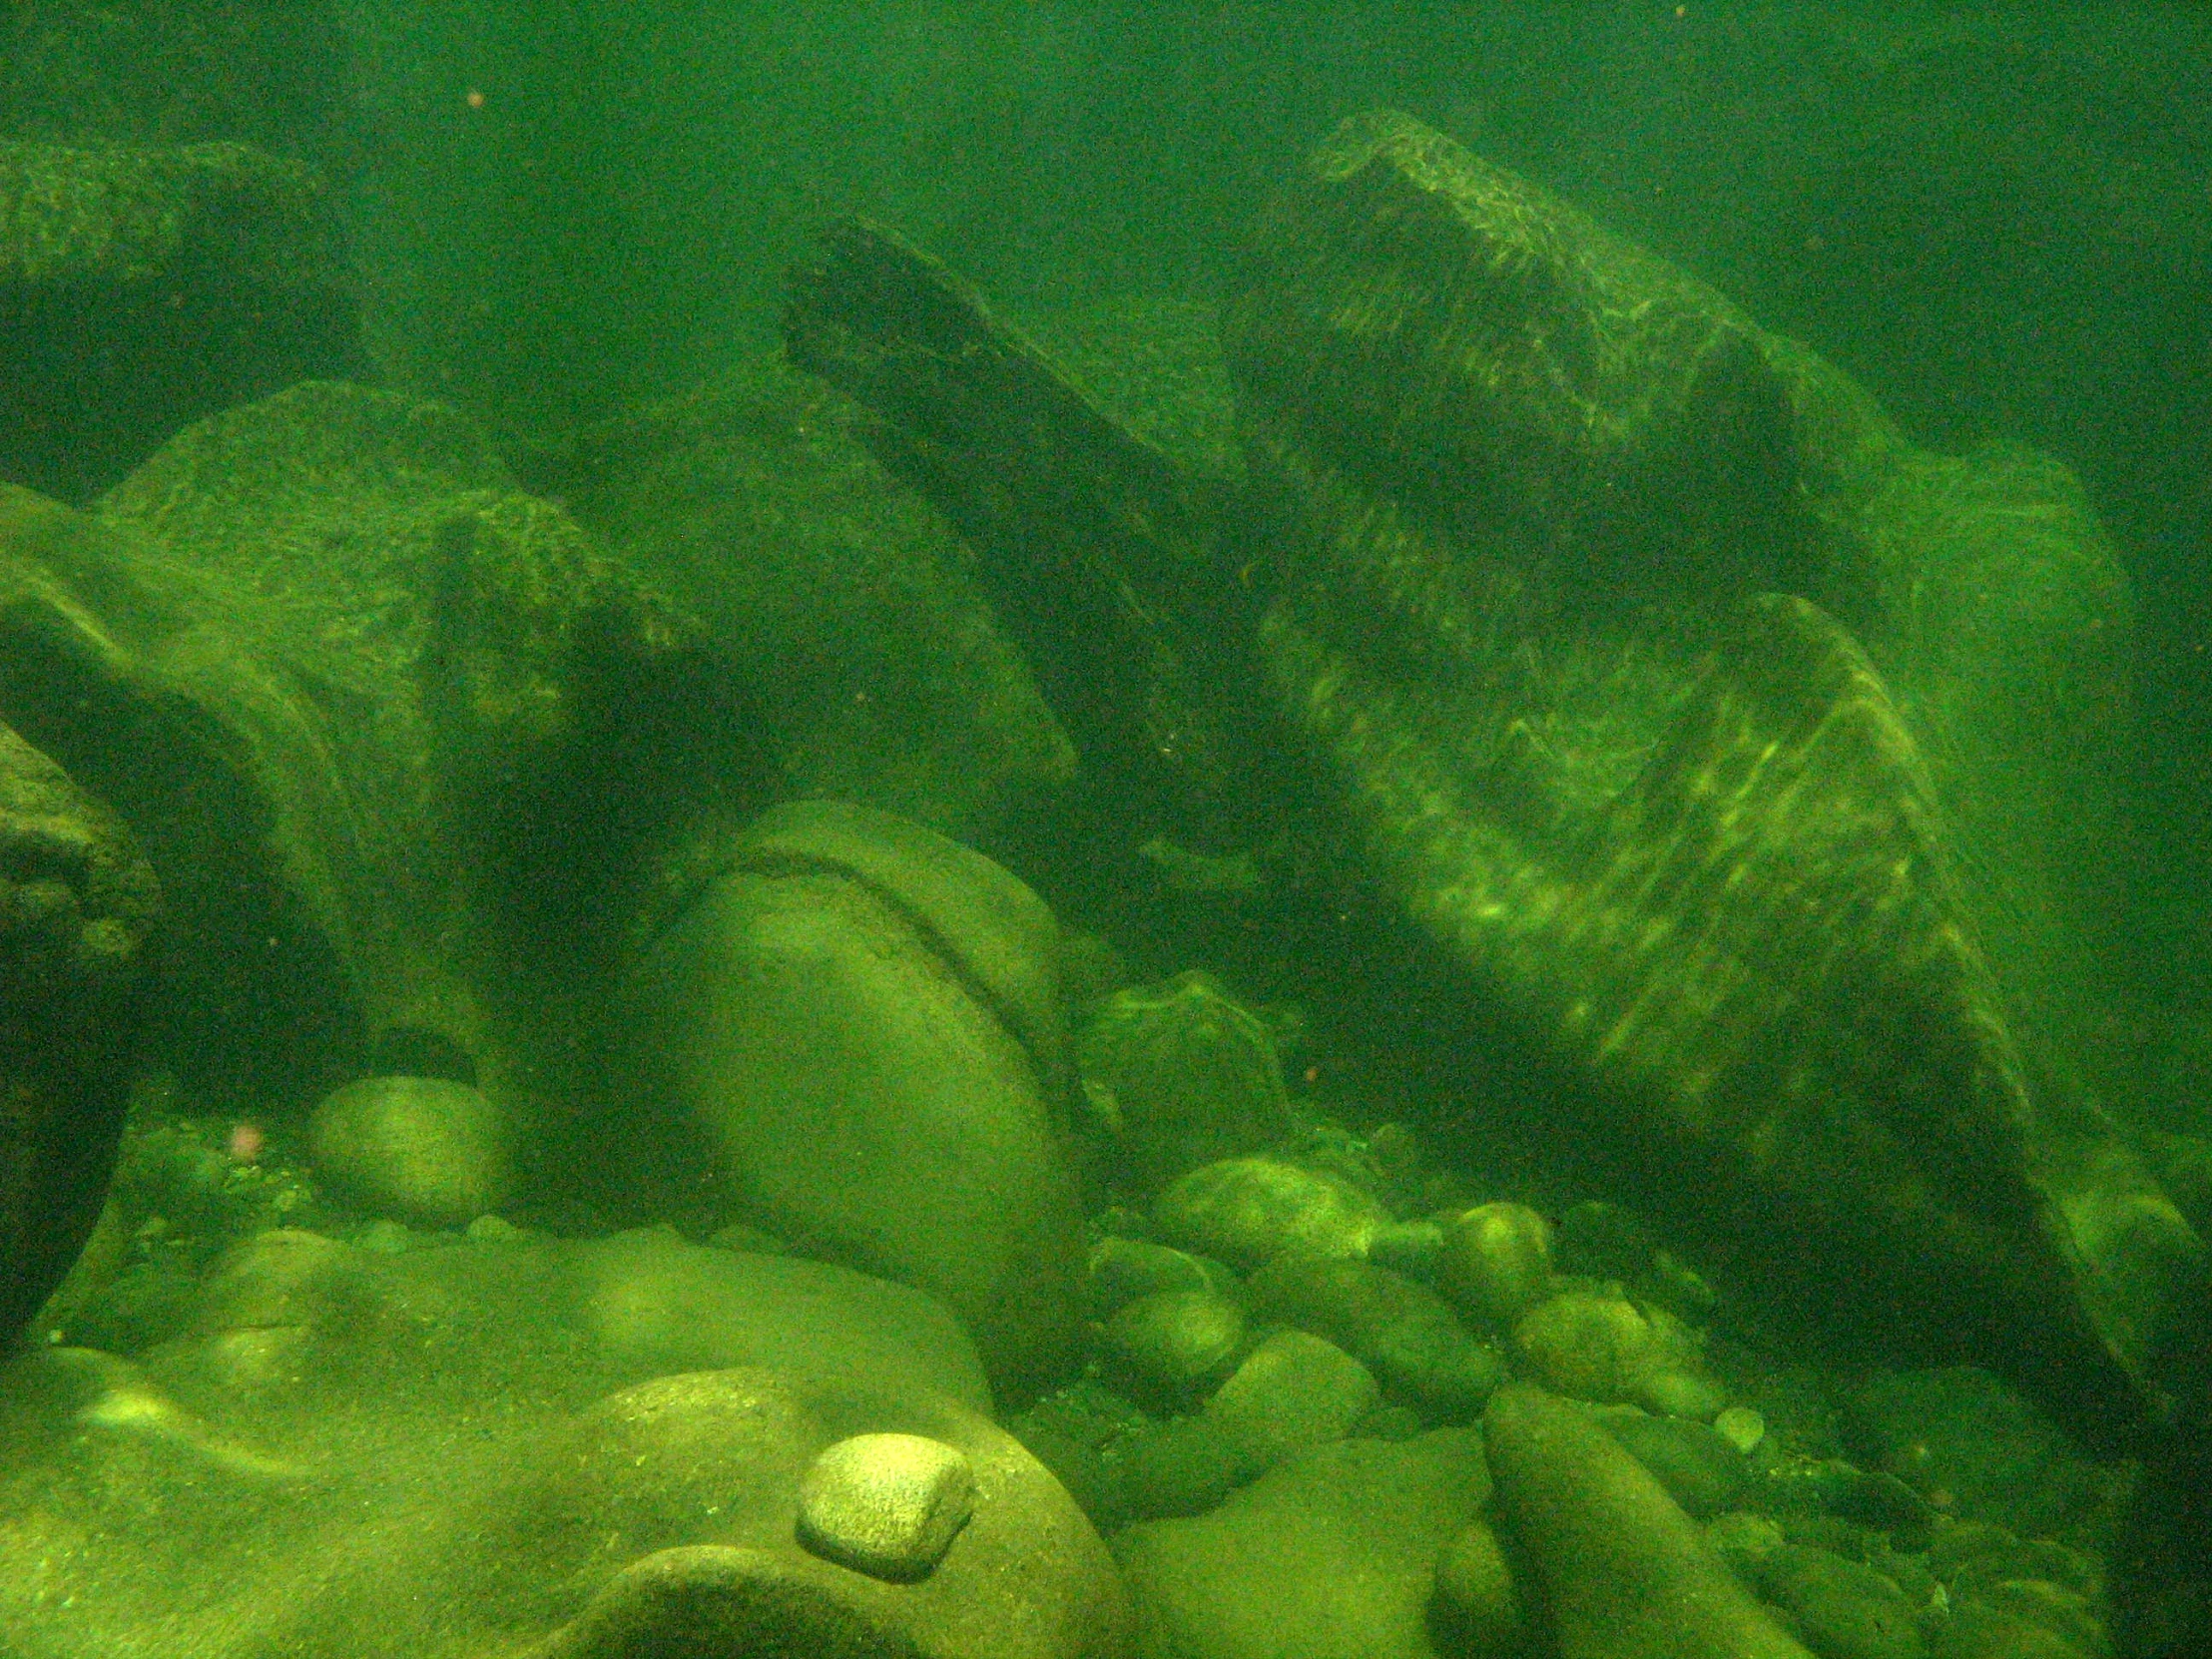 underwater view of several rocks in the water